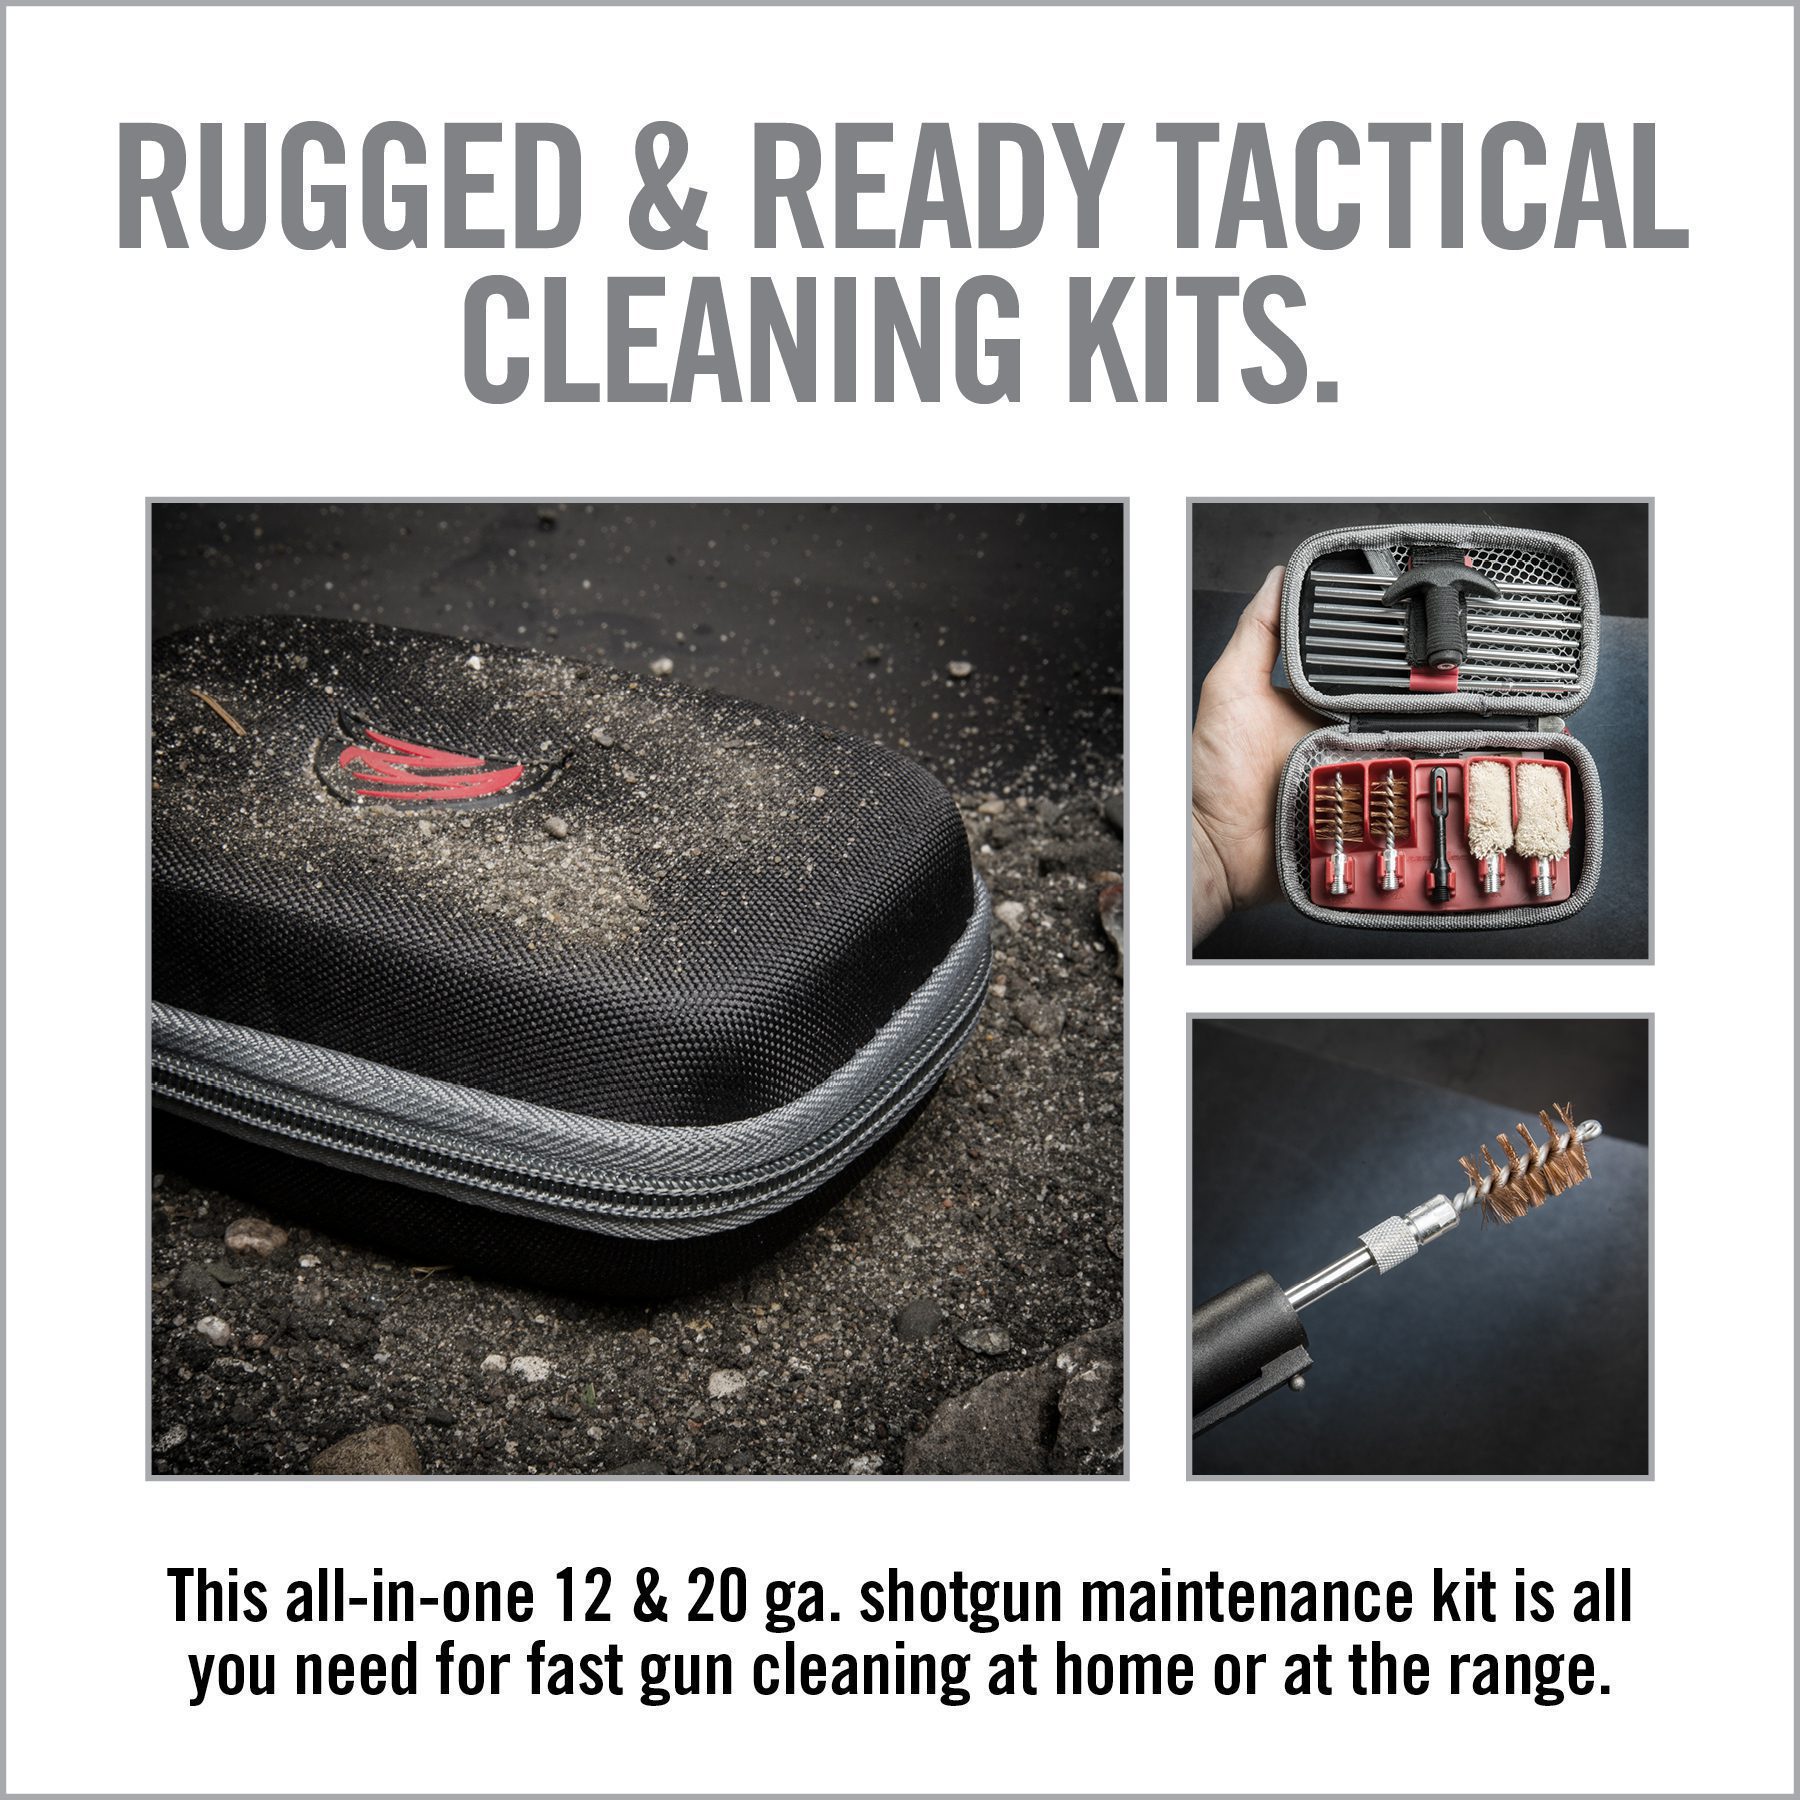 an advertisement for rugged and ready practical cleaning kits